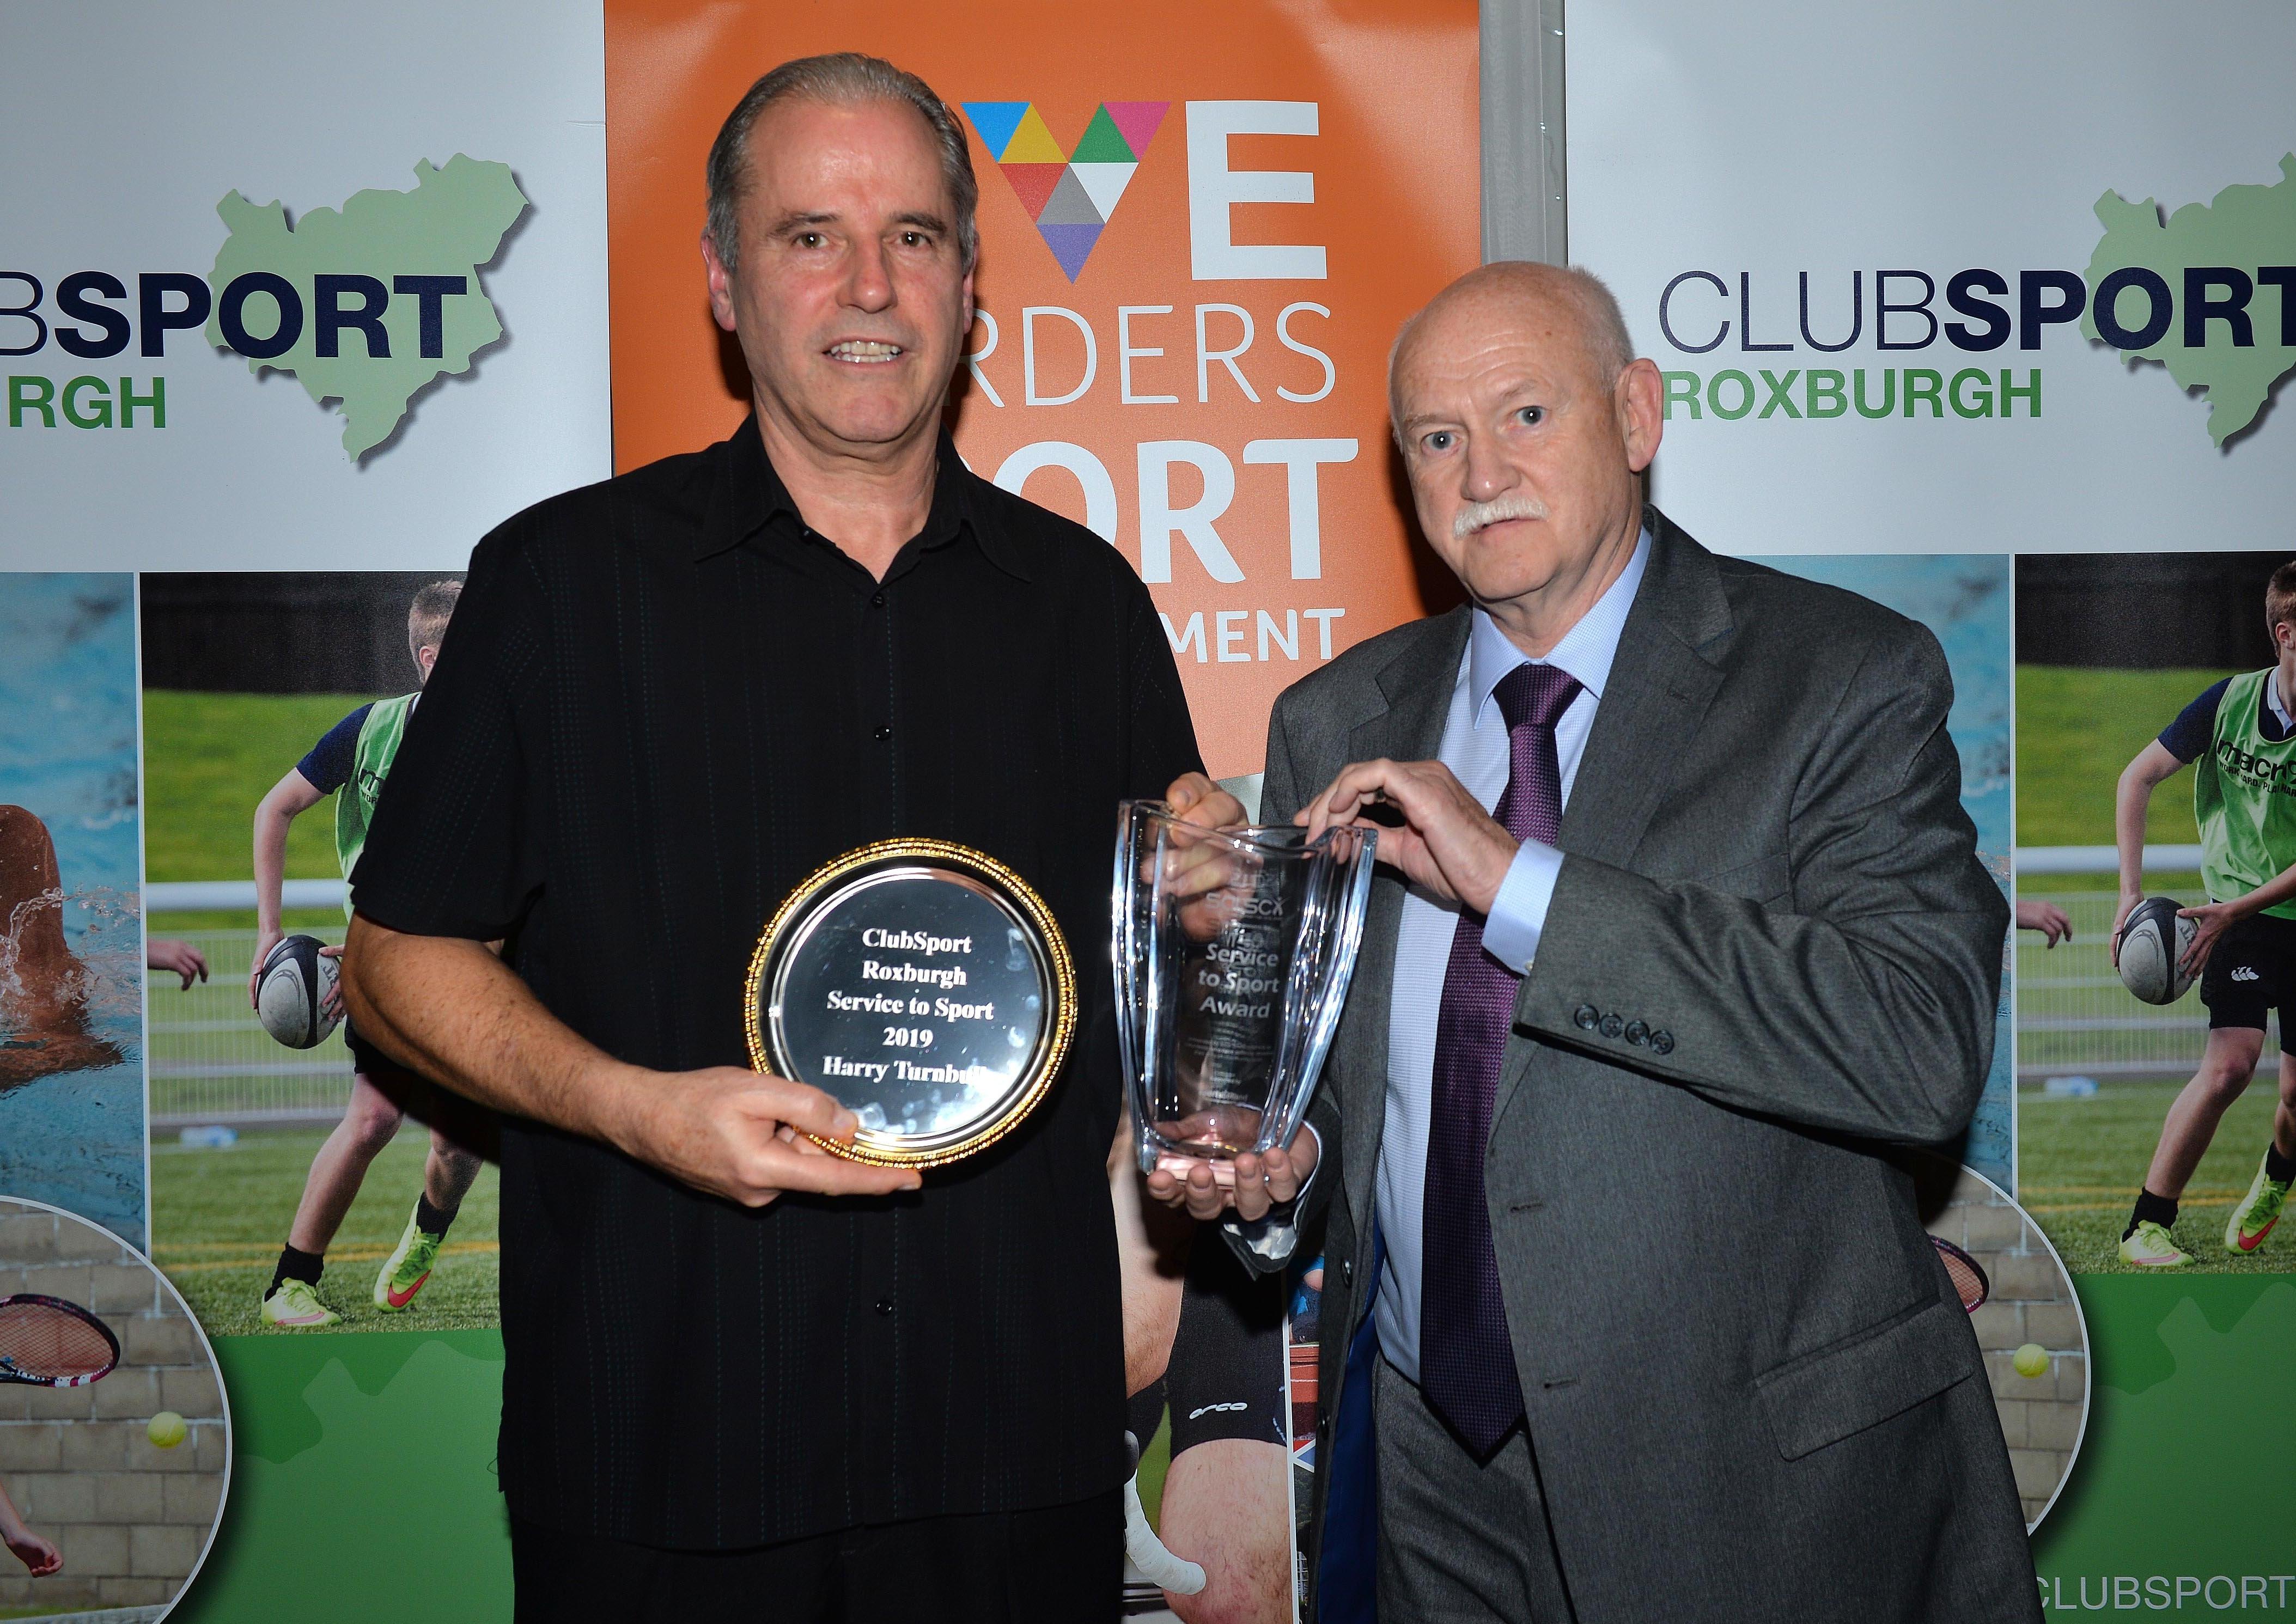 RIck Kenny, right, handed over a Services to Sport Award to Harry Turnbull for his work promoting badminton.